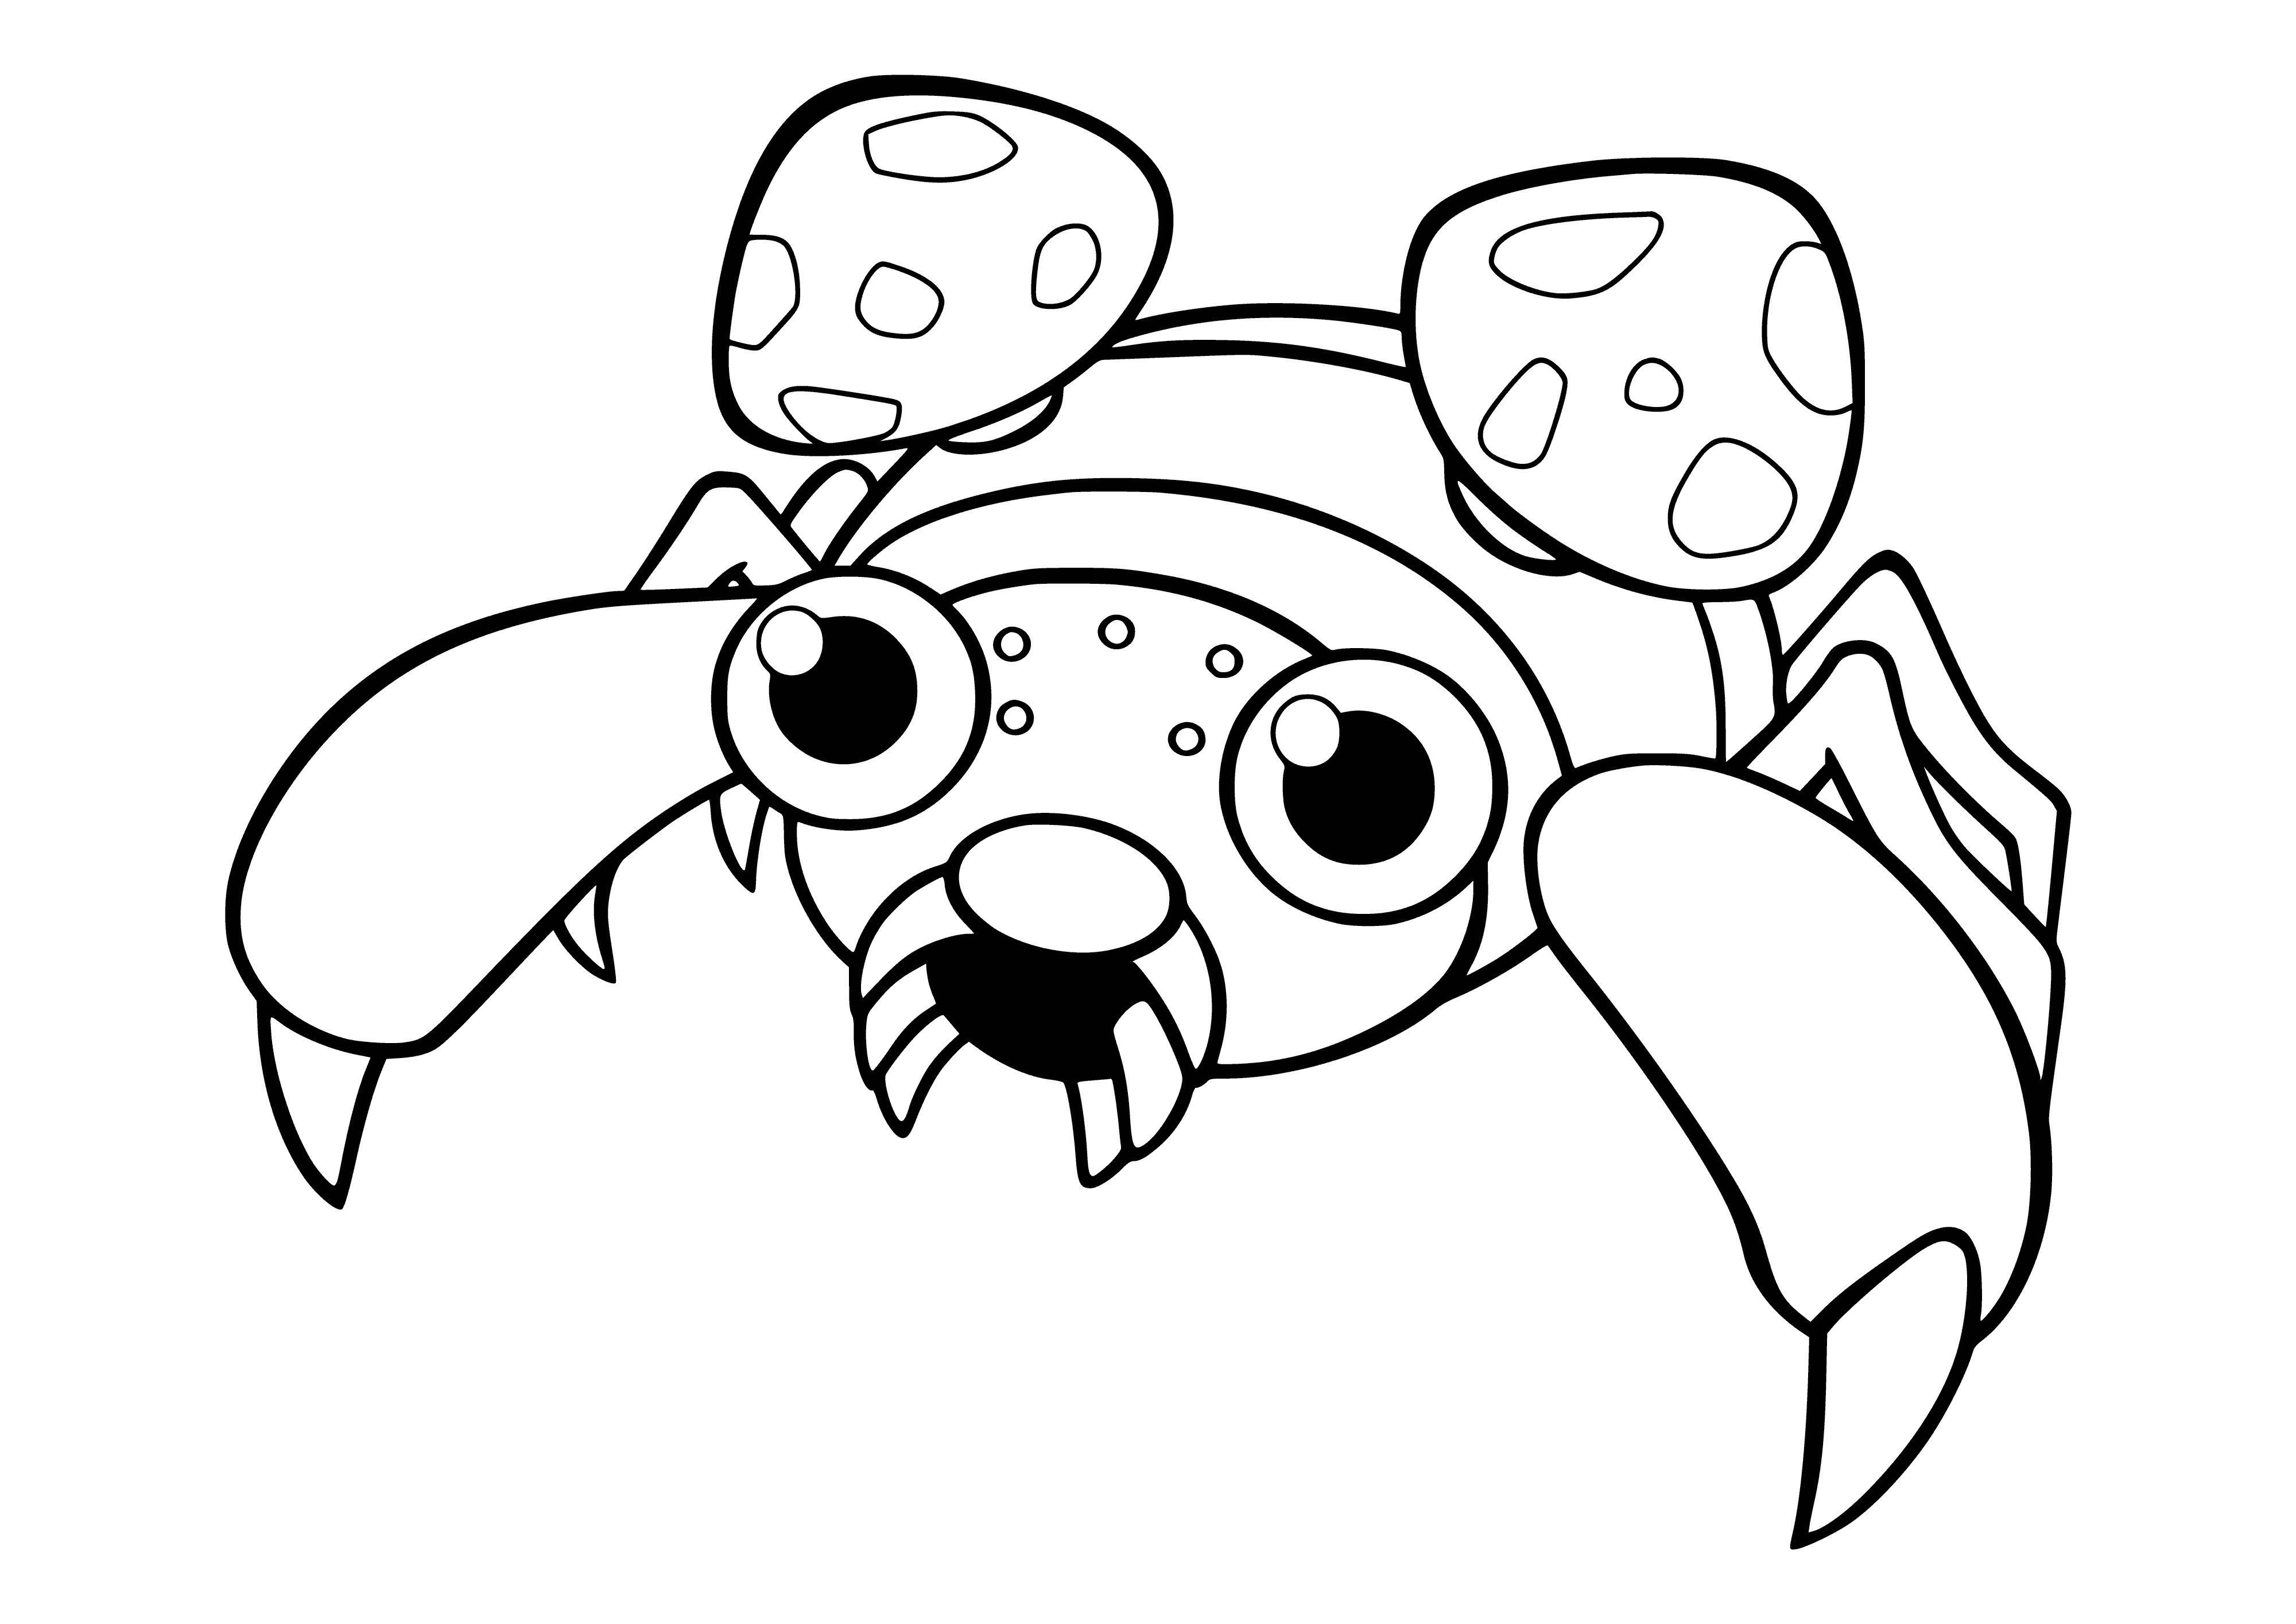 coloring page: Small red & yellow caterpillar-like Pokemon has black dots & big eyes, plus two black horn-like objects on its head.